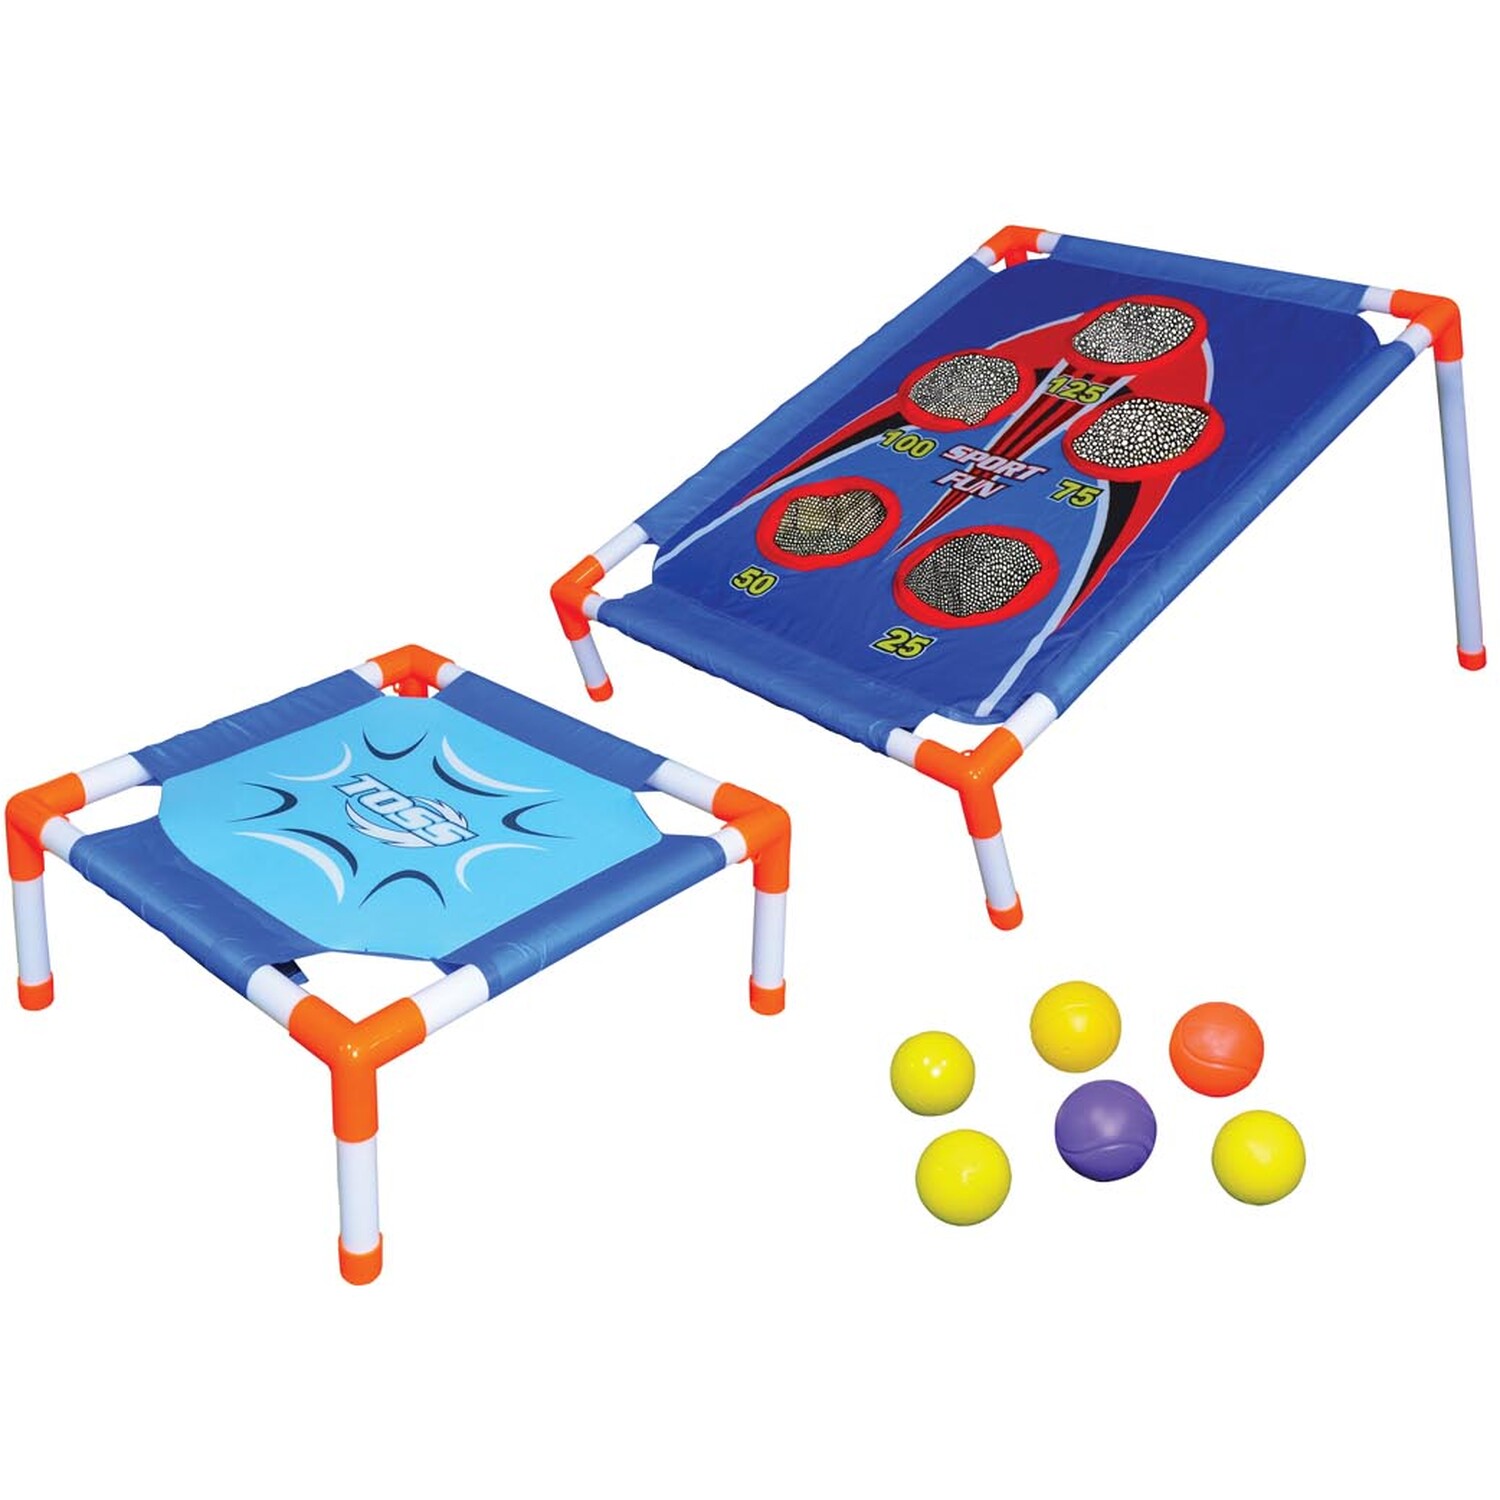 Earth Bags Toss Play Set - Blue Image 1